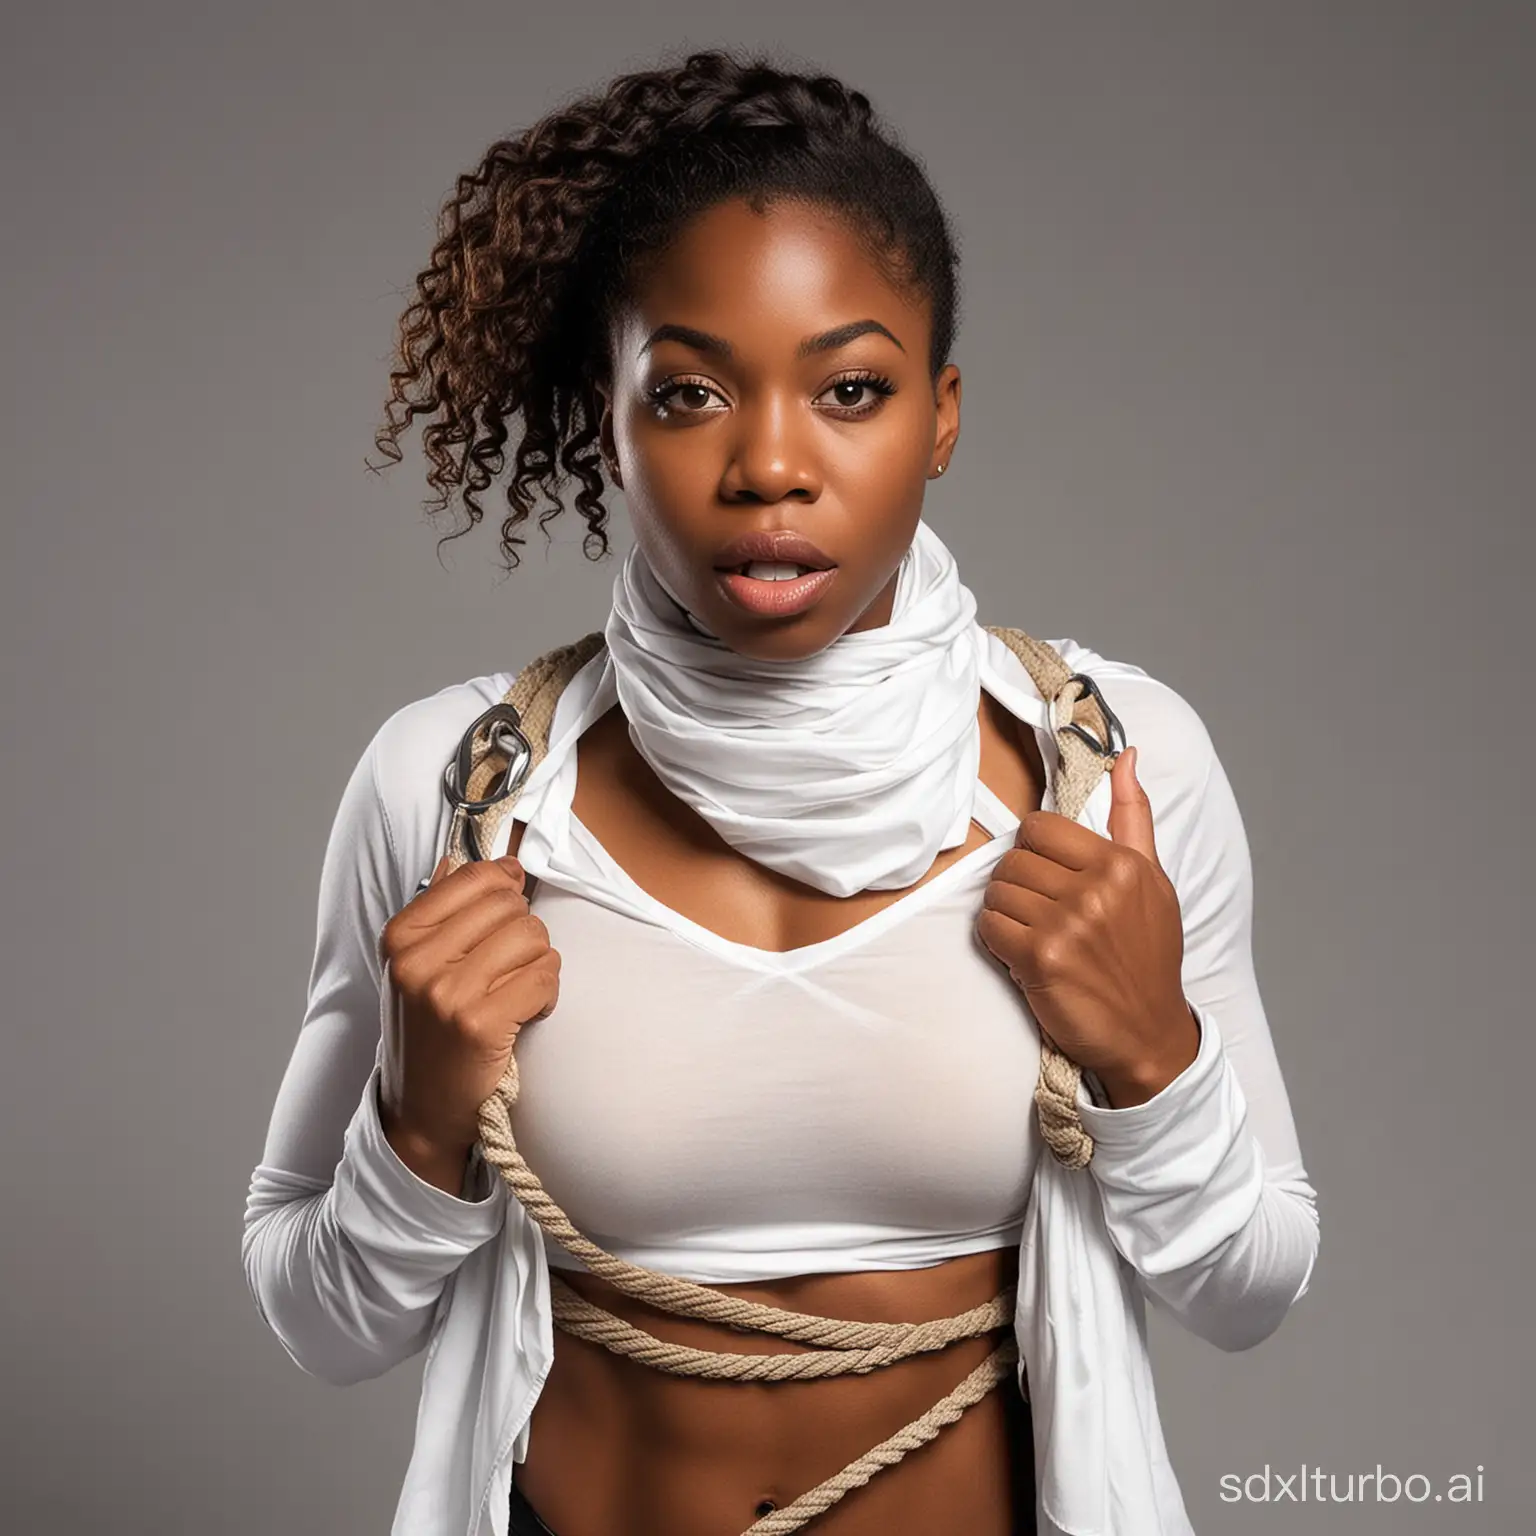 A 25-year-old African American female superhero from the United States, bound with ropes, hands tied behind her back, mouth gagged with a white cloth strip.